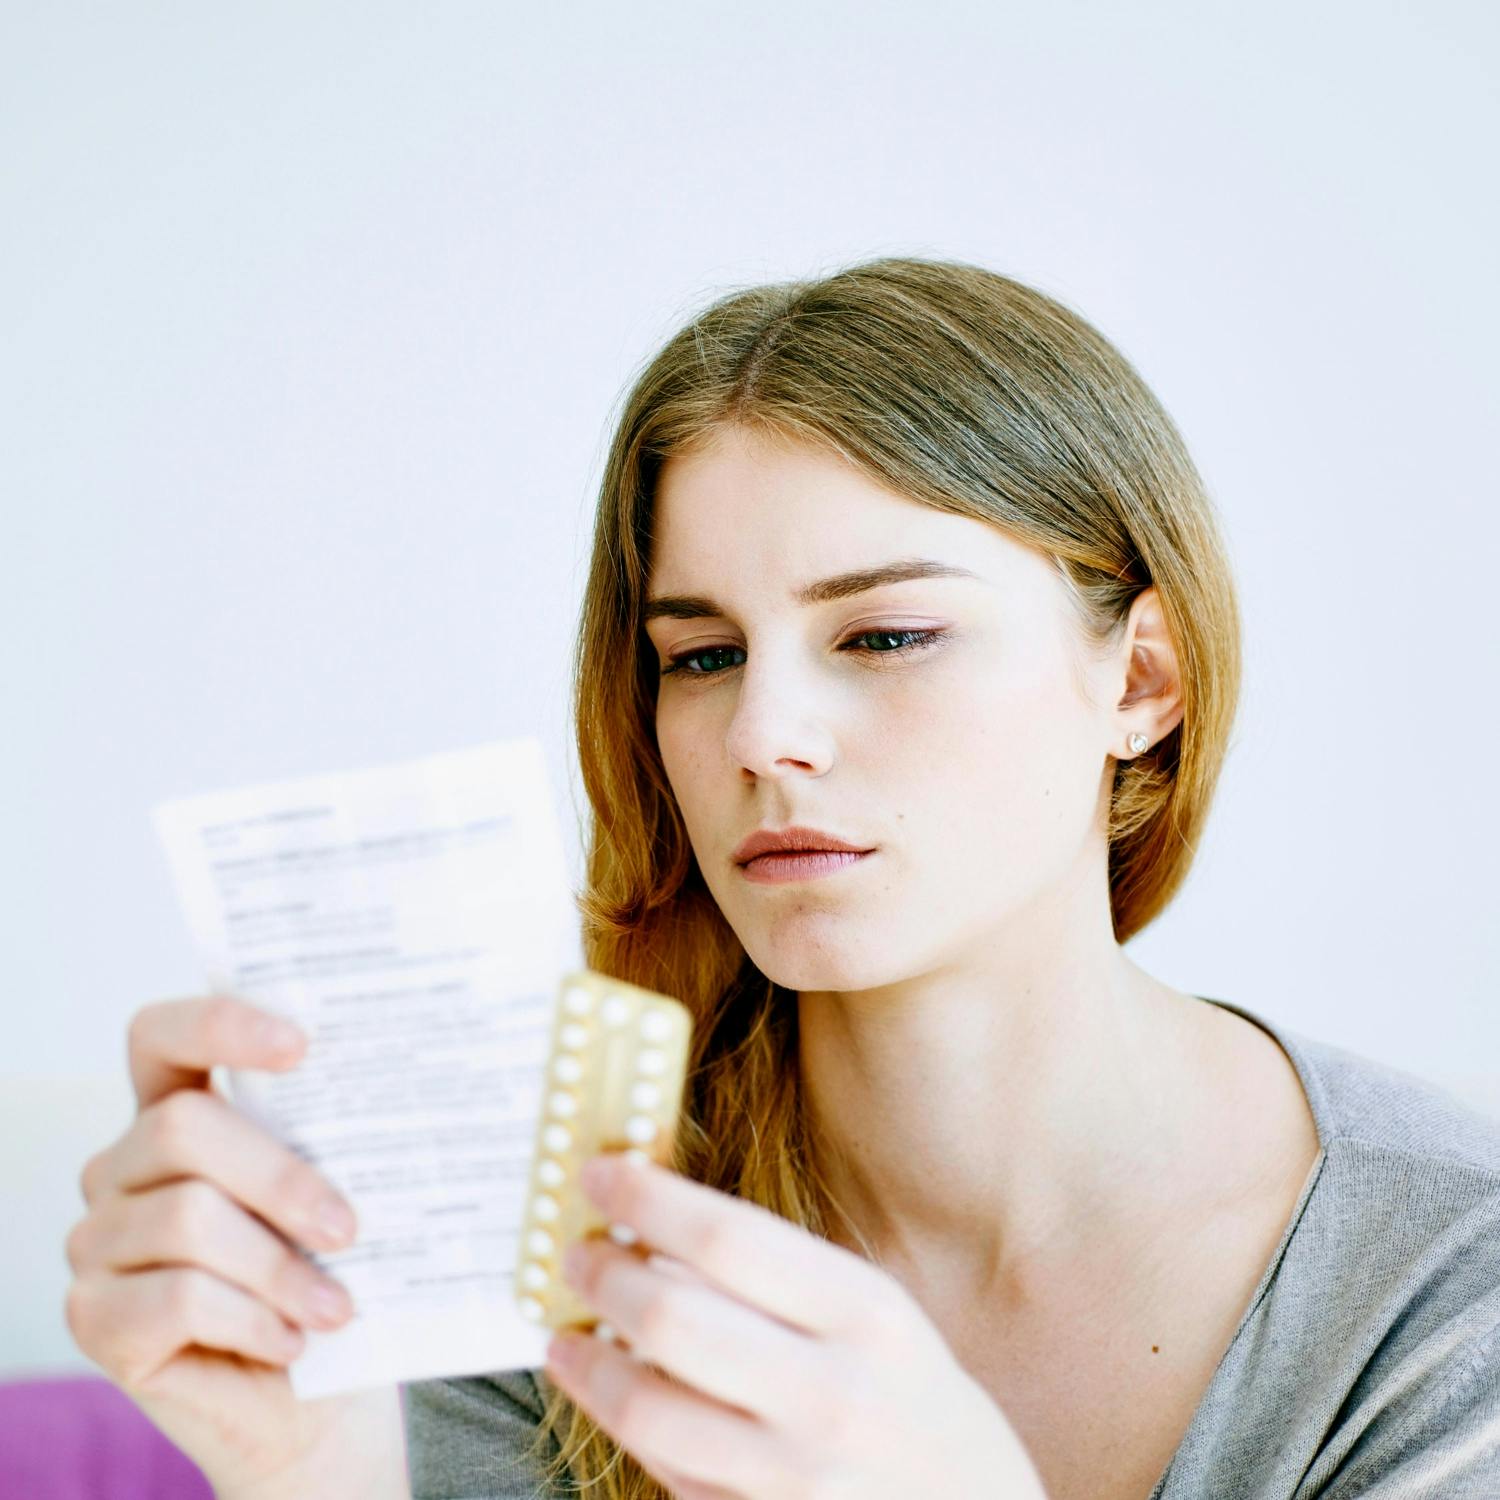 Contraceptive Pill To Be Available In Pharmacies Without Prescription